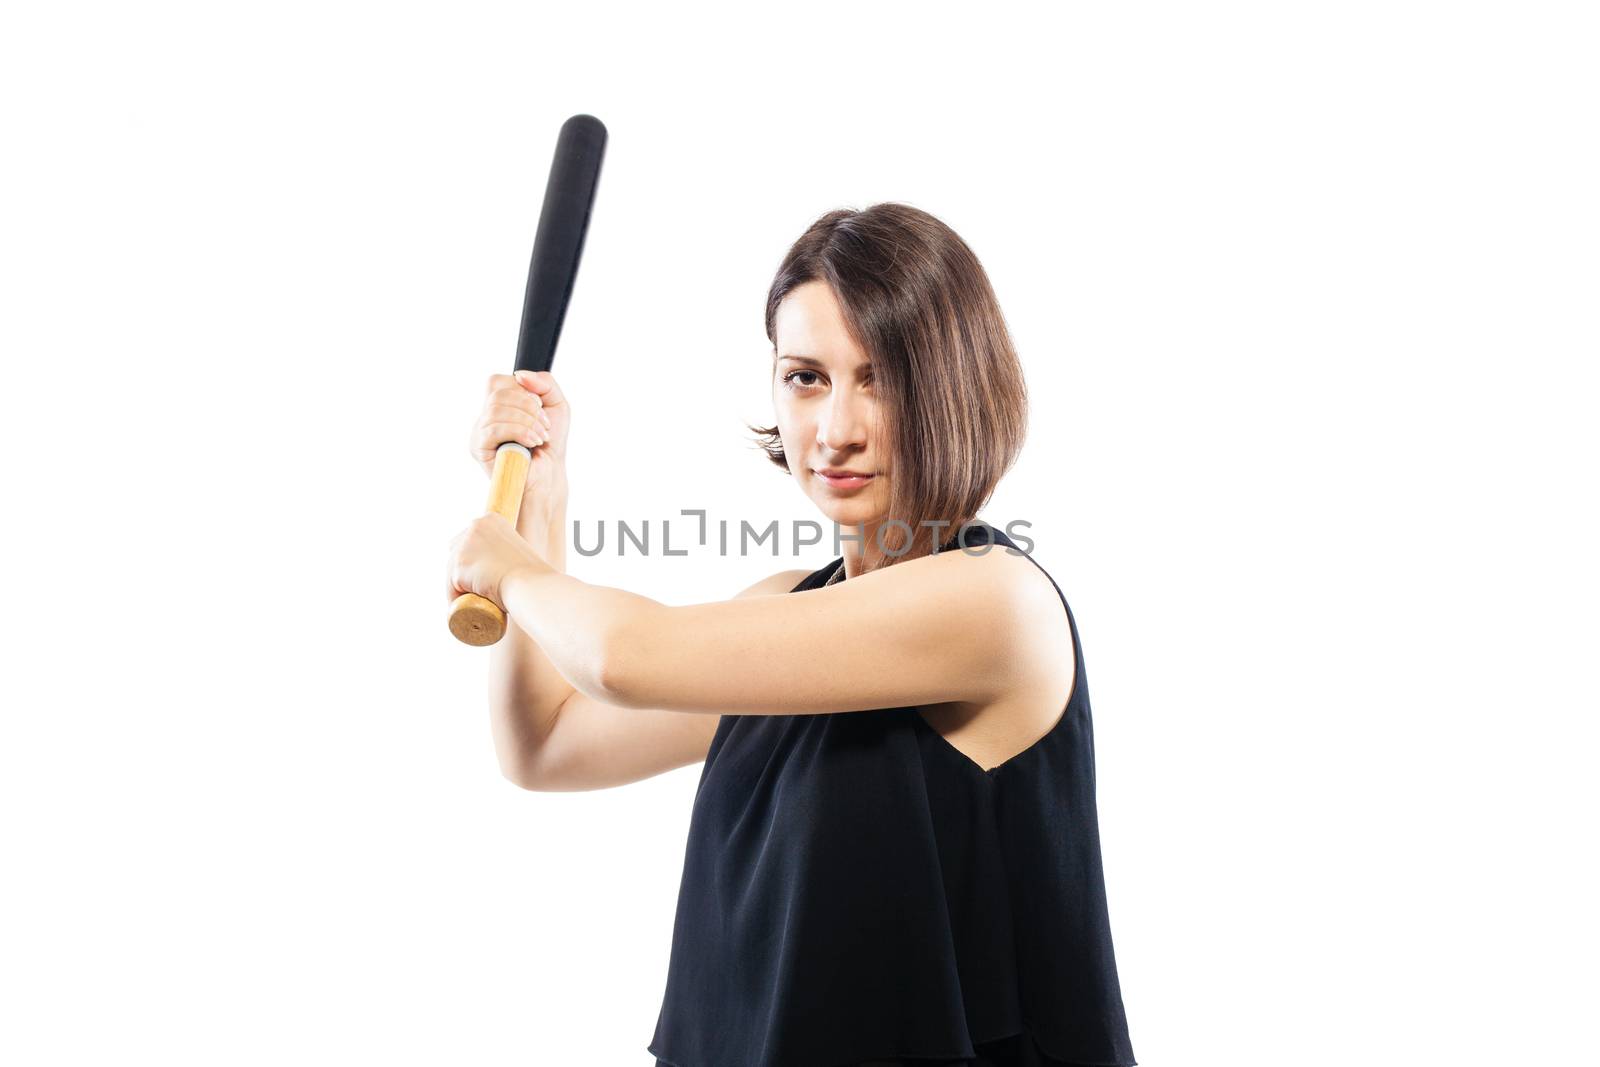 girl in camouflage pants holding a baseball bat, isolated on white